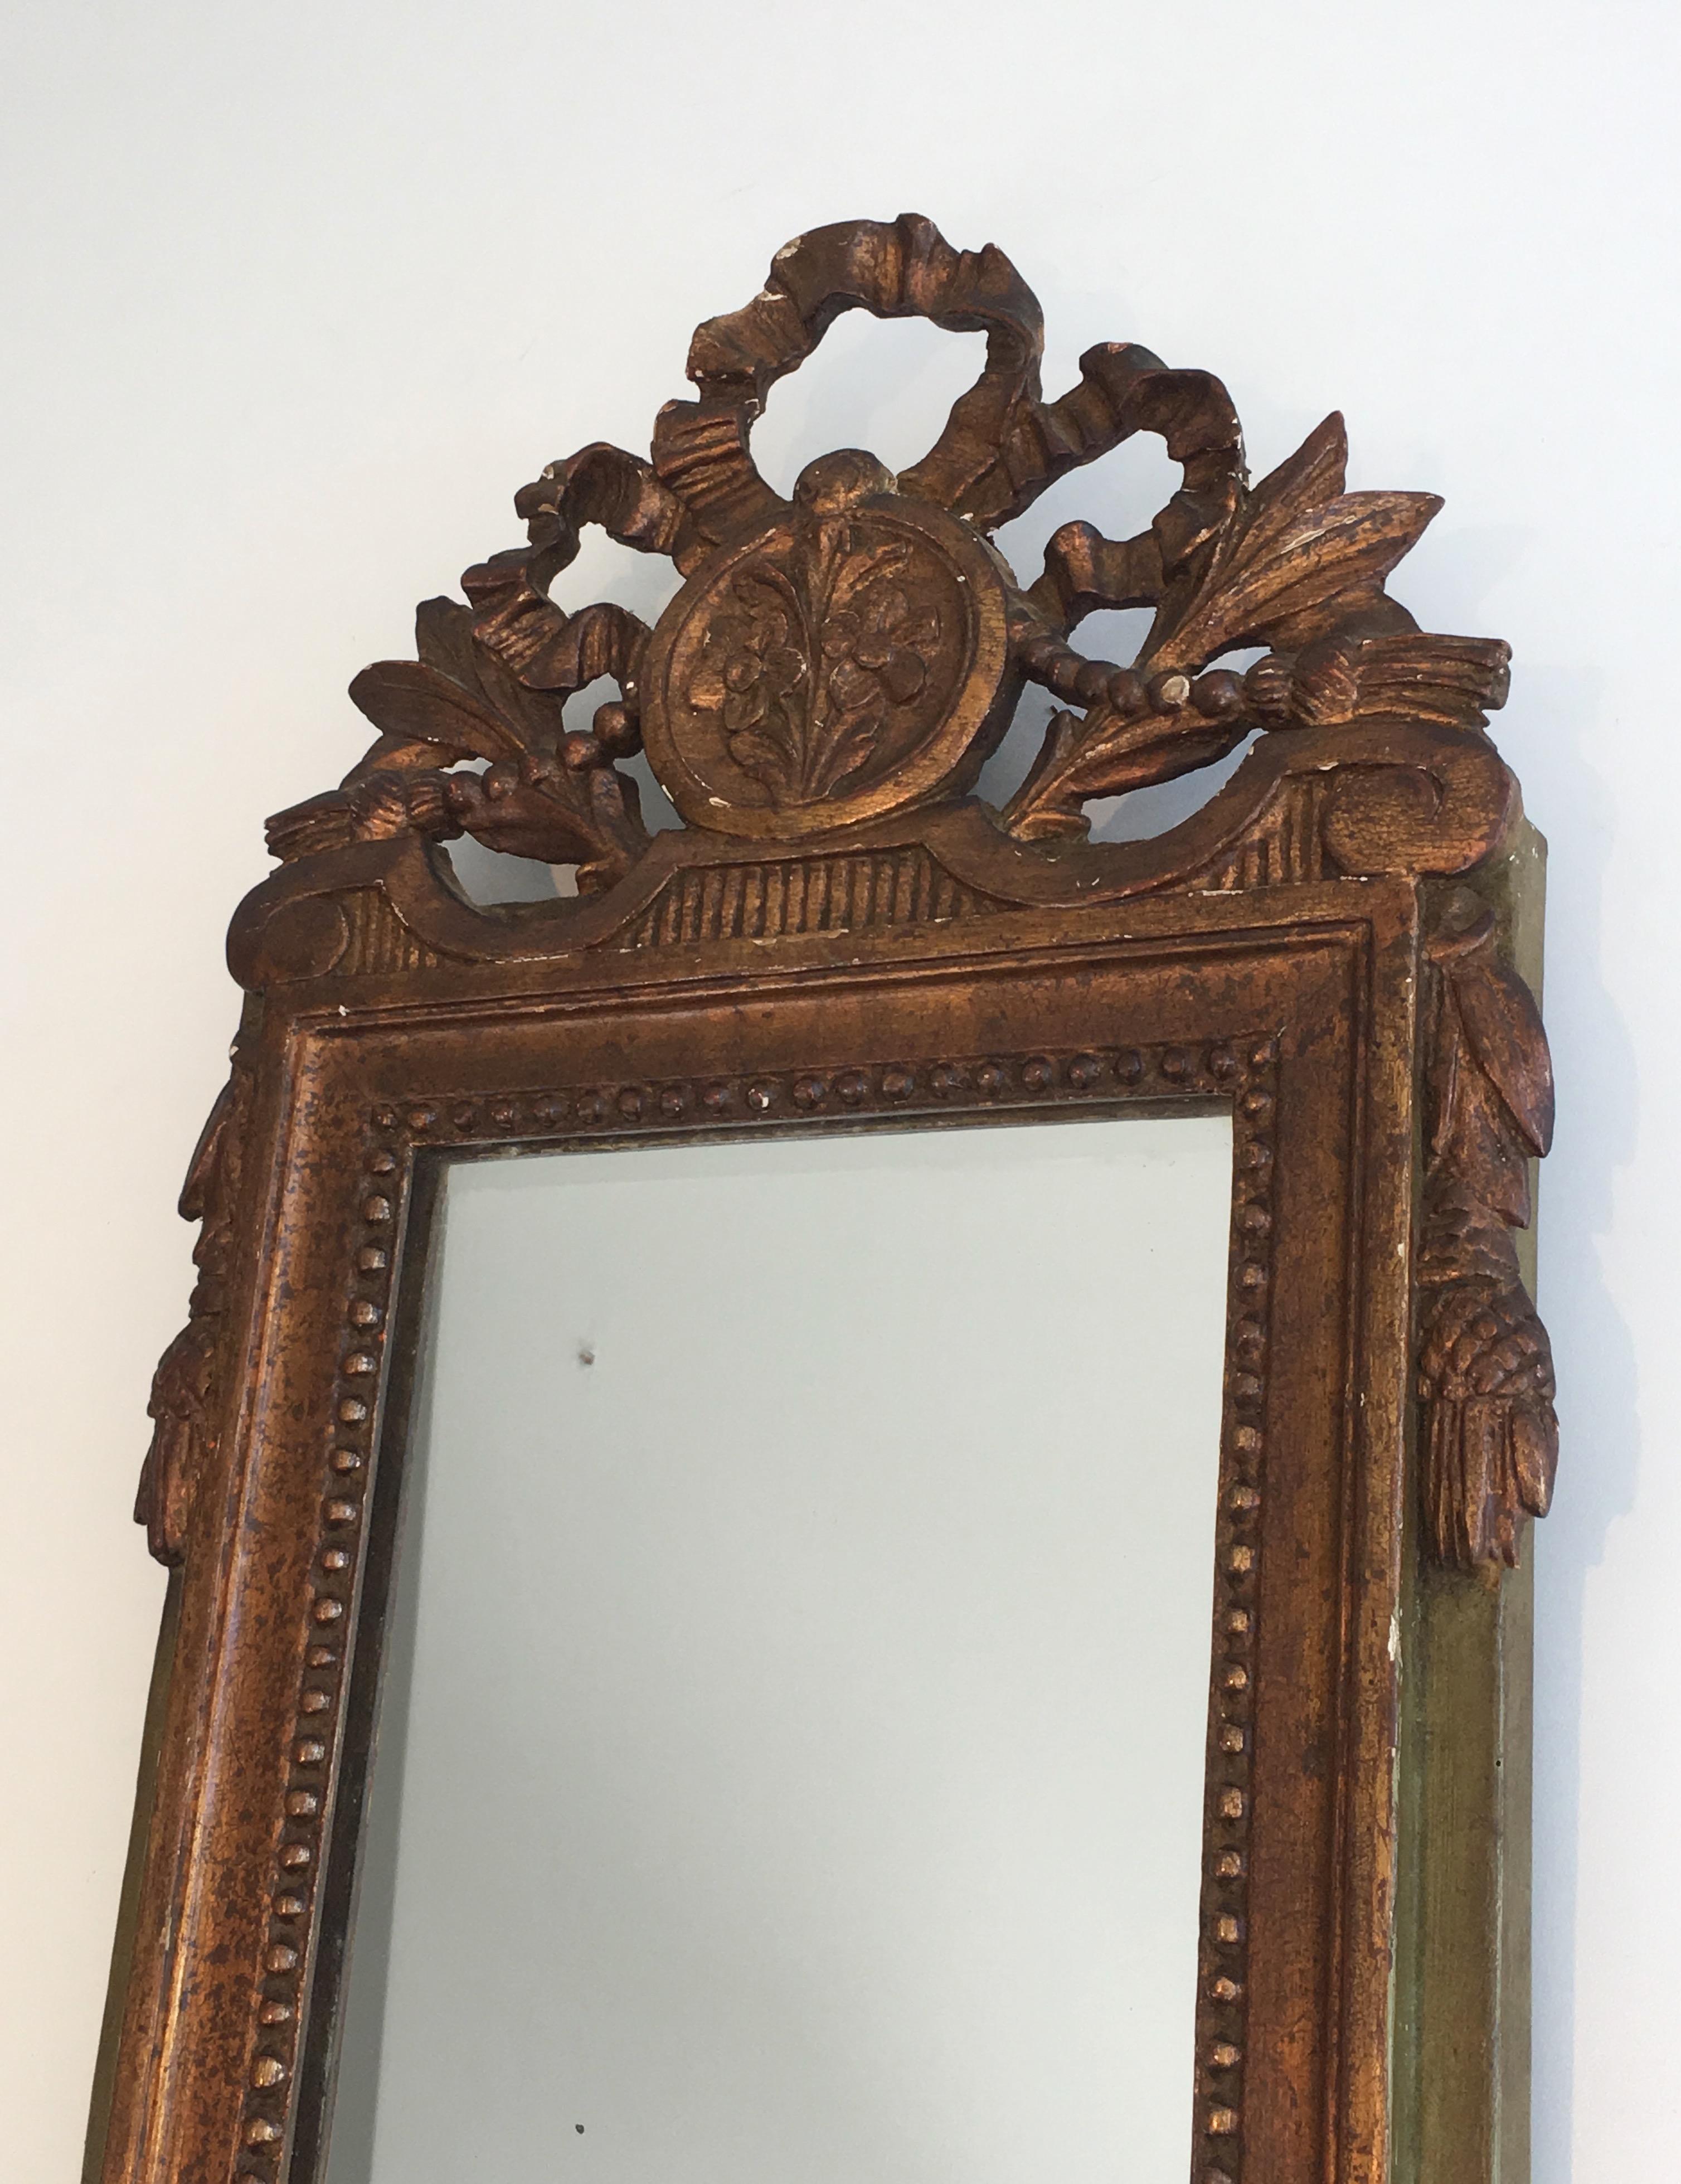 Louis the xvi Style Gilt and Painted Wood Mirror, French, 19th Century For Sale 1